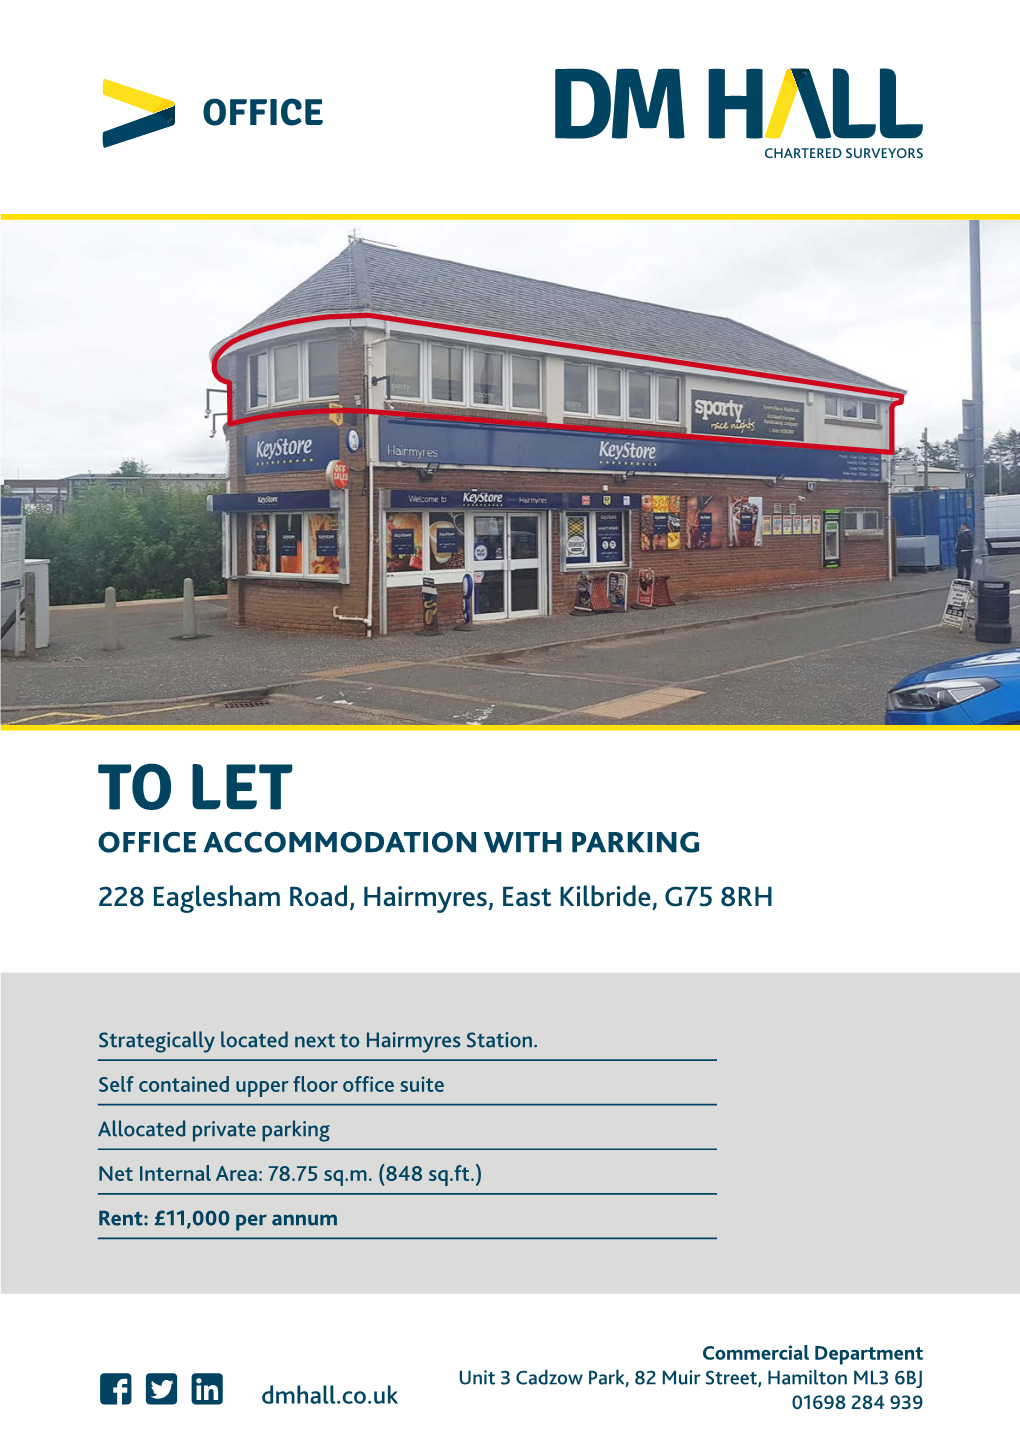 TO LET OFFICE ACCOMMODATION with PARKING 228 Eaglesham Road, Hairmyres, East Kilbride, G75 8RH